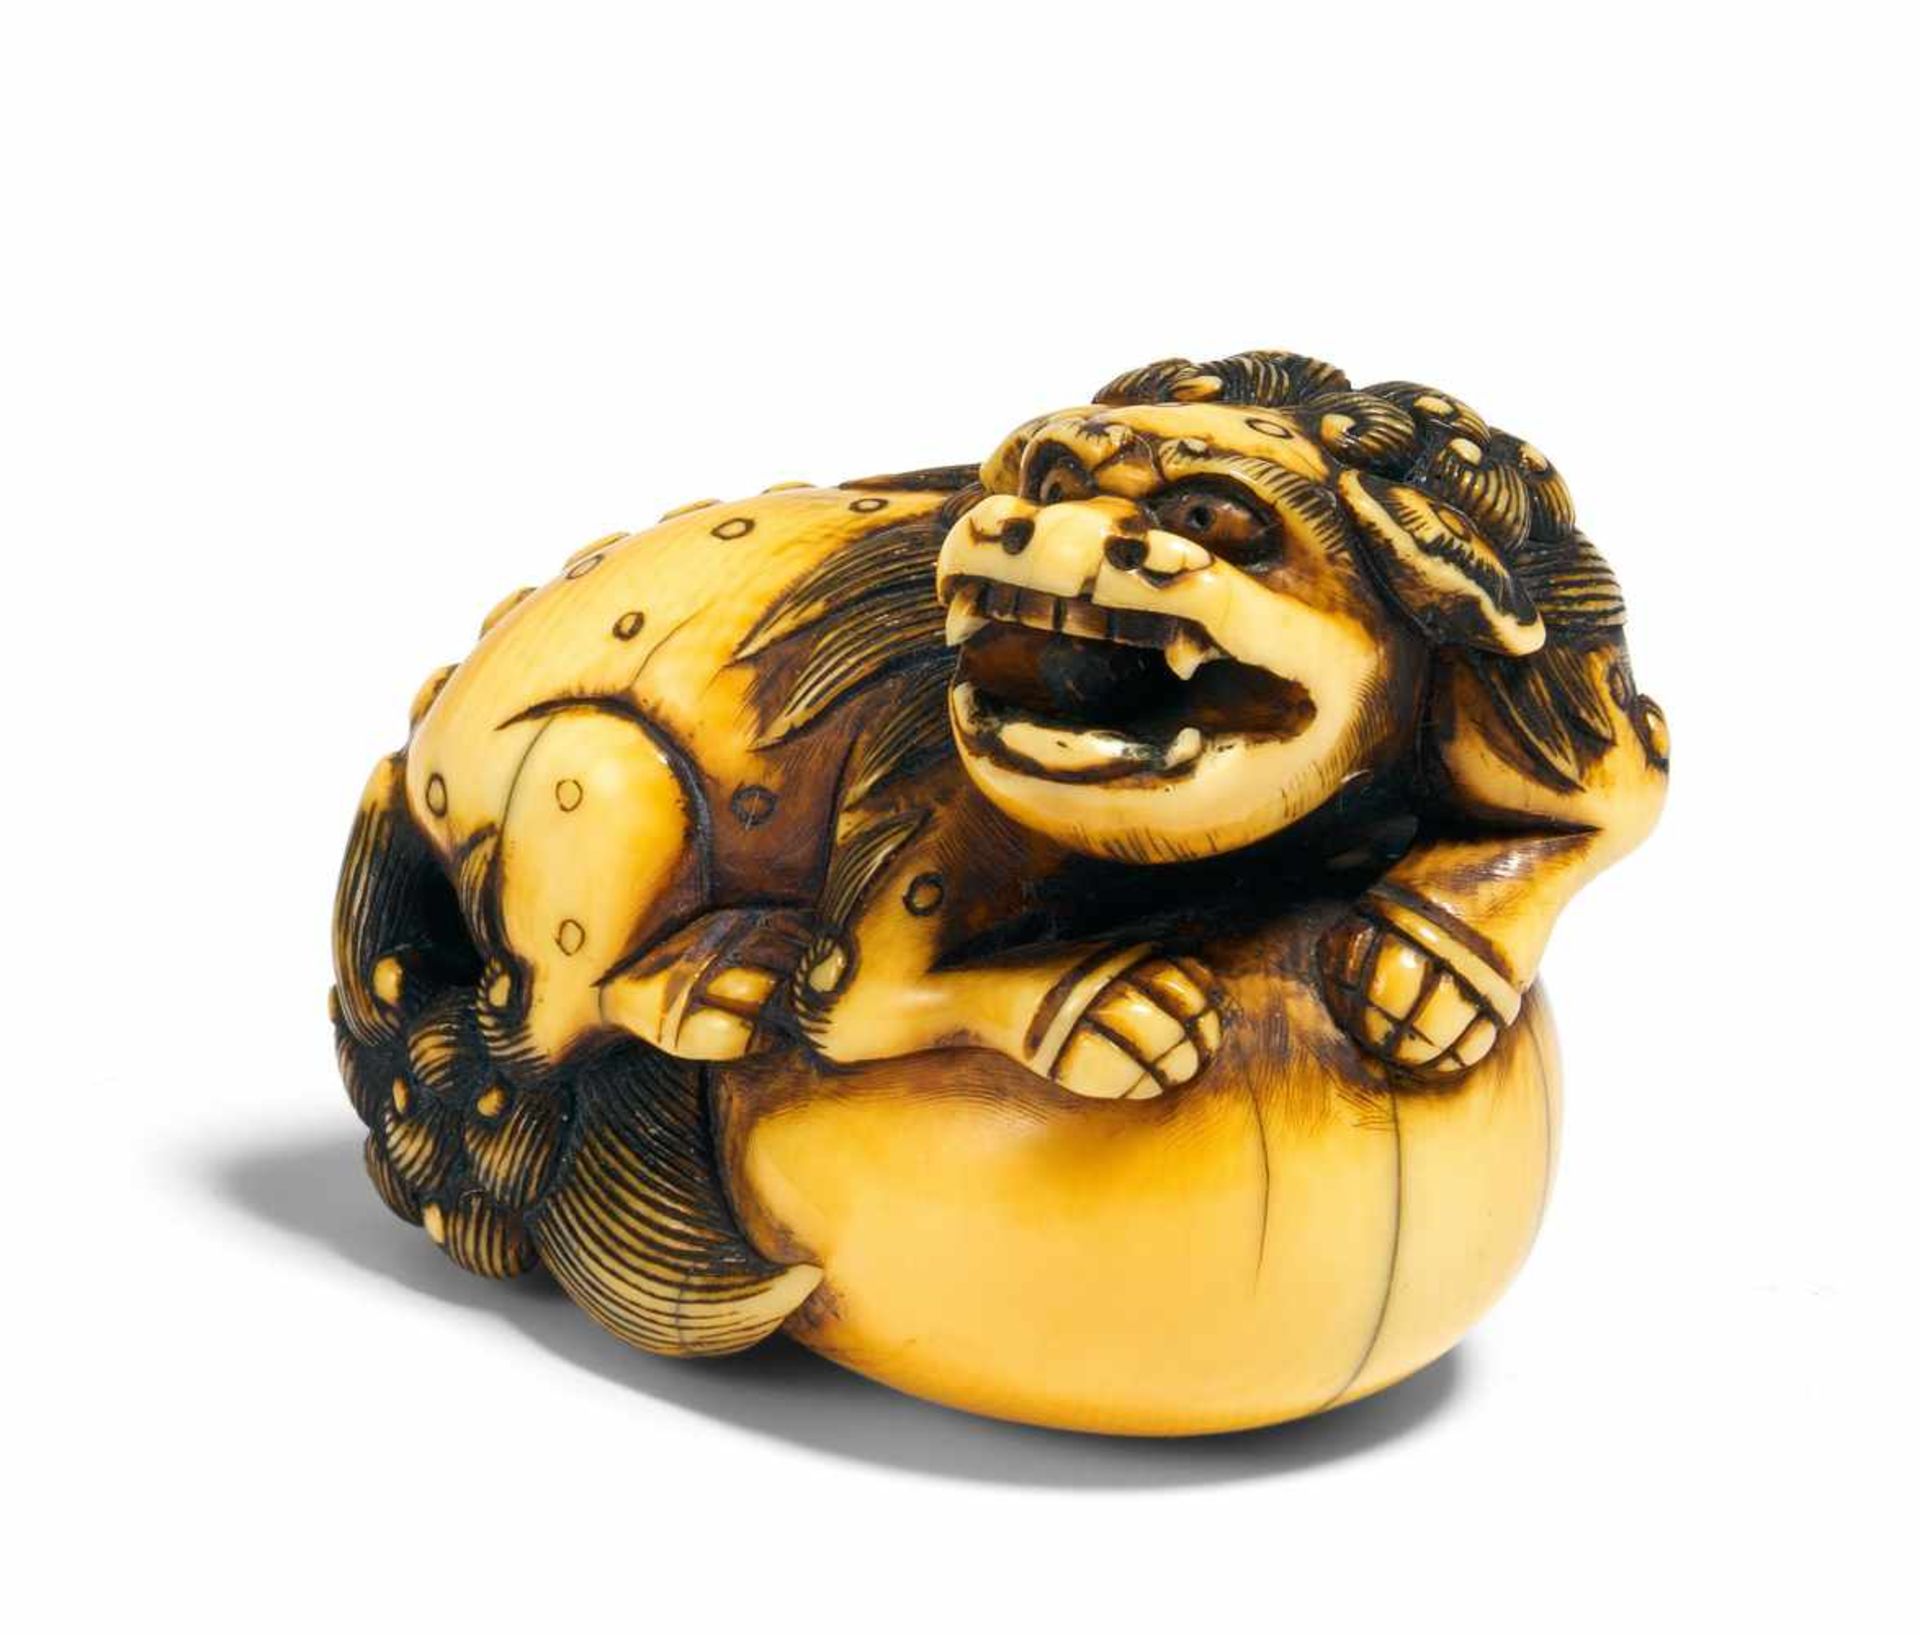 NETSUKE OF A SHISHI LION ON A BIG BALL. Japan. 18th c. Ivory, the engraving stained dark, with amber